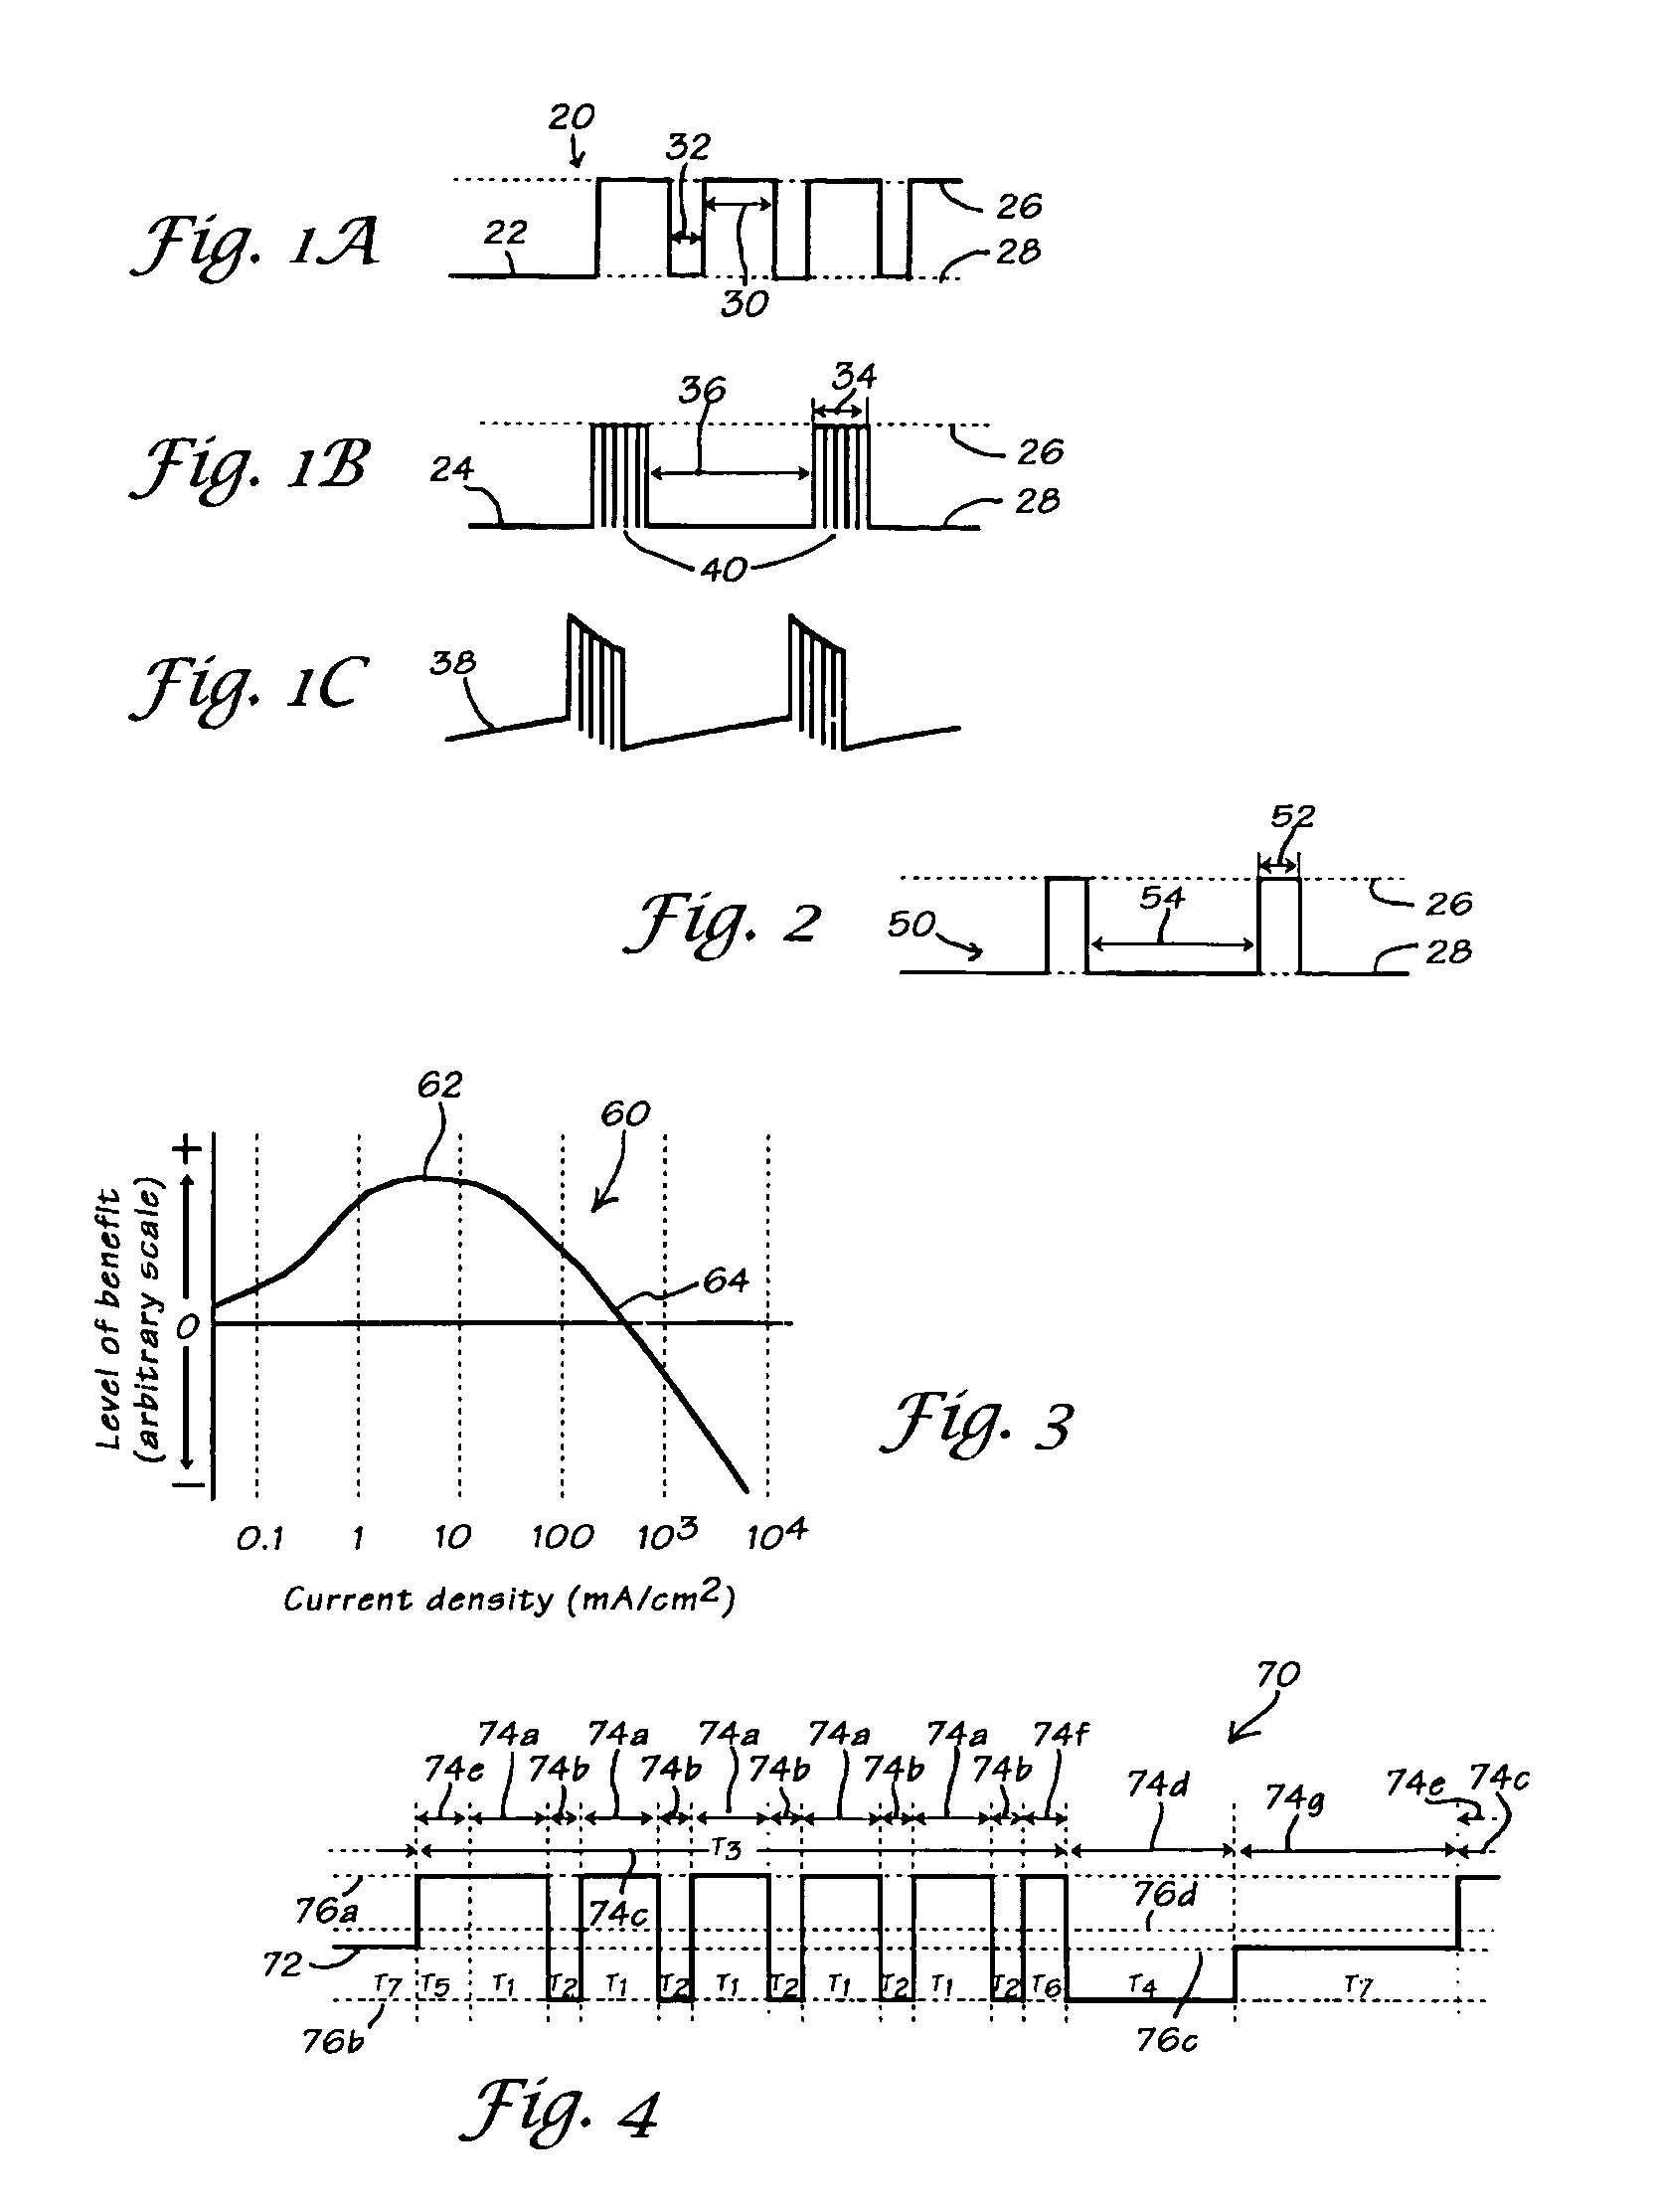 Apparatus and method for bioelectric stimulation, healing acceleration and pain relief